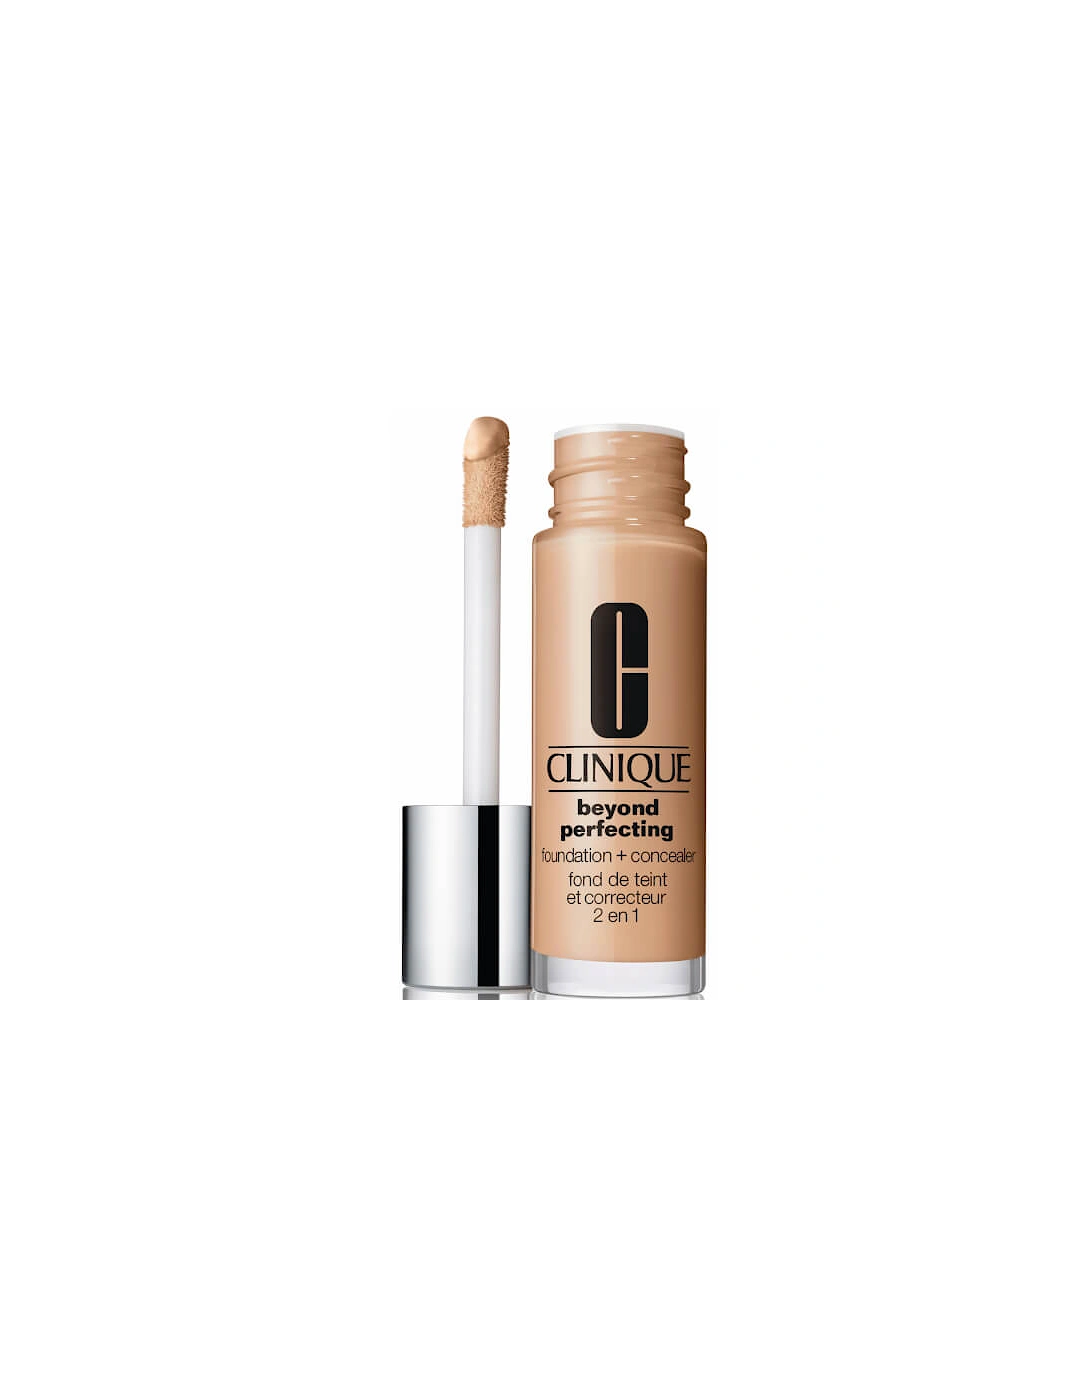 Beyond Perfecting Foundation and Concealer Cream Chambois, 2 of 1